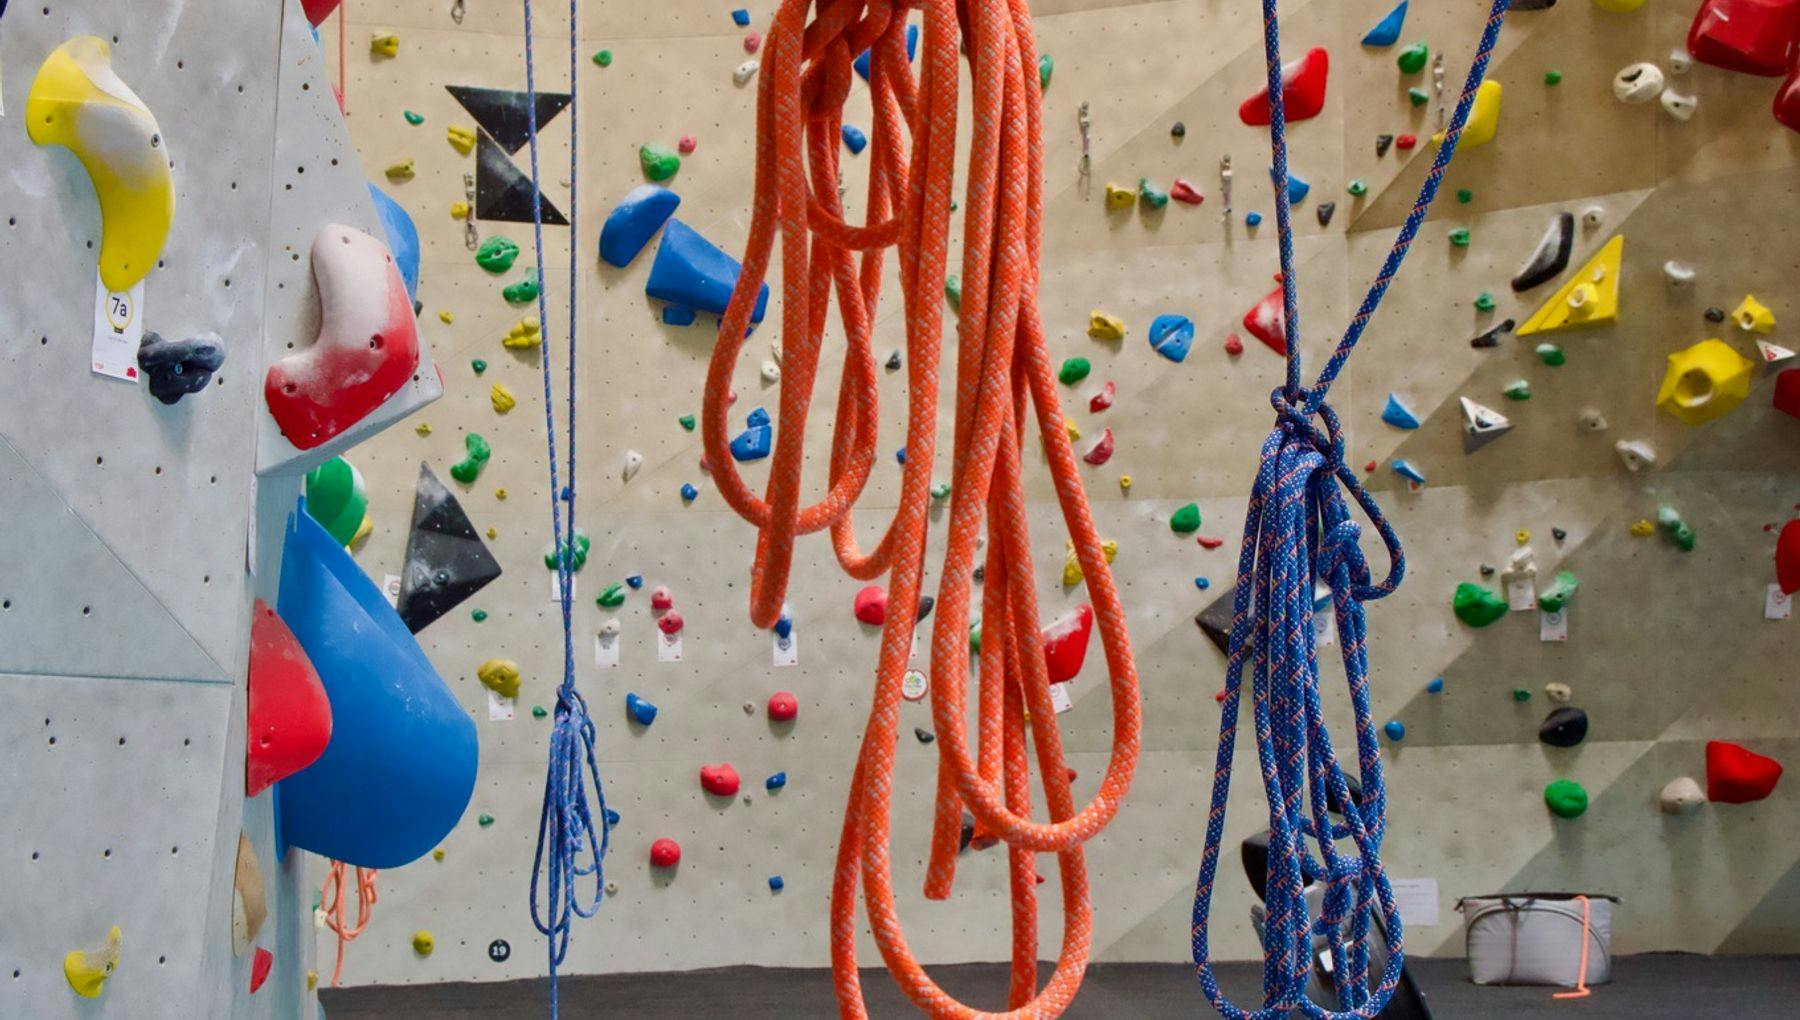 Climbing room inside of Mountain network